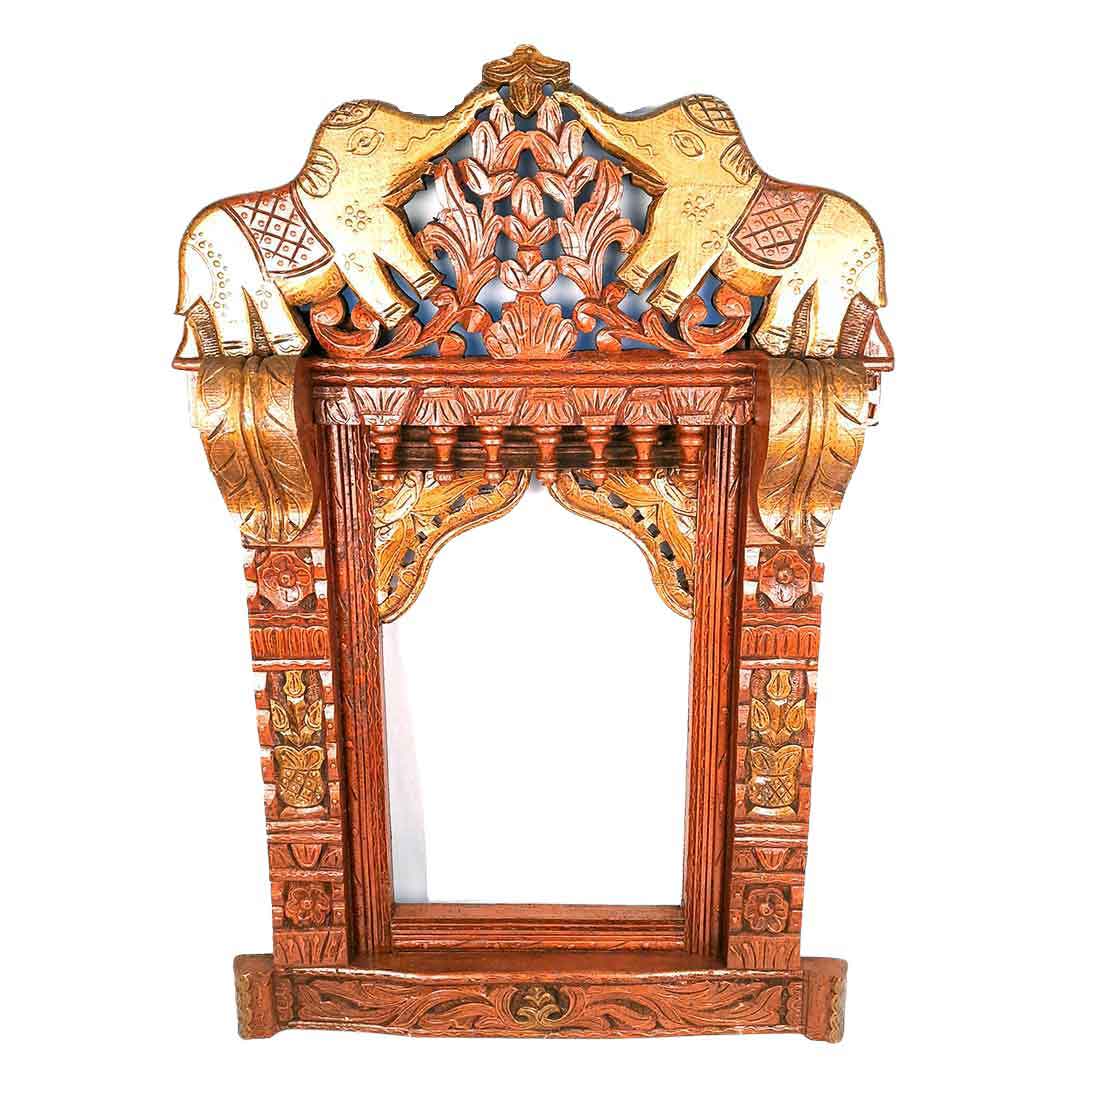 Jharokha Wall Hanging Big | Wooden Jharokha Frame Hangings - Elephant Design - For Home, Wall Decor, Frames, Living room, Entrance Decoration & Gifts  - 36 Inch